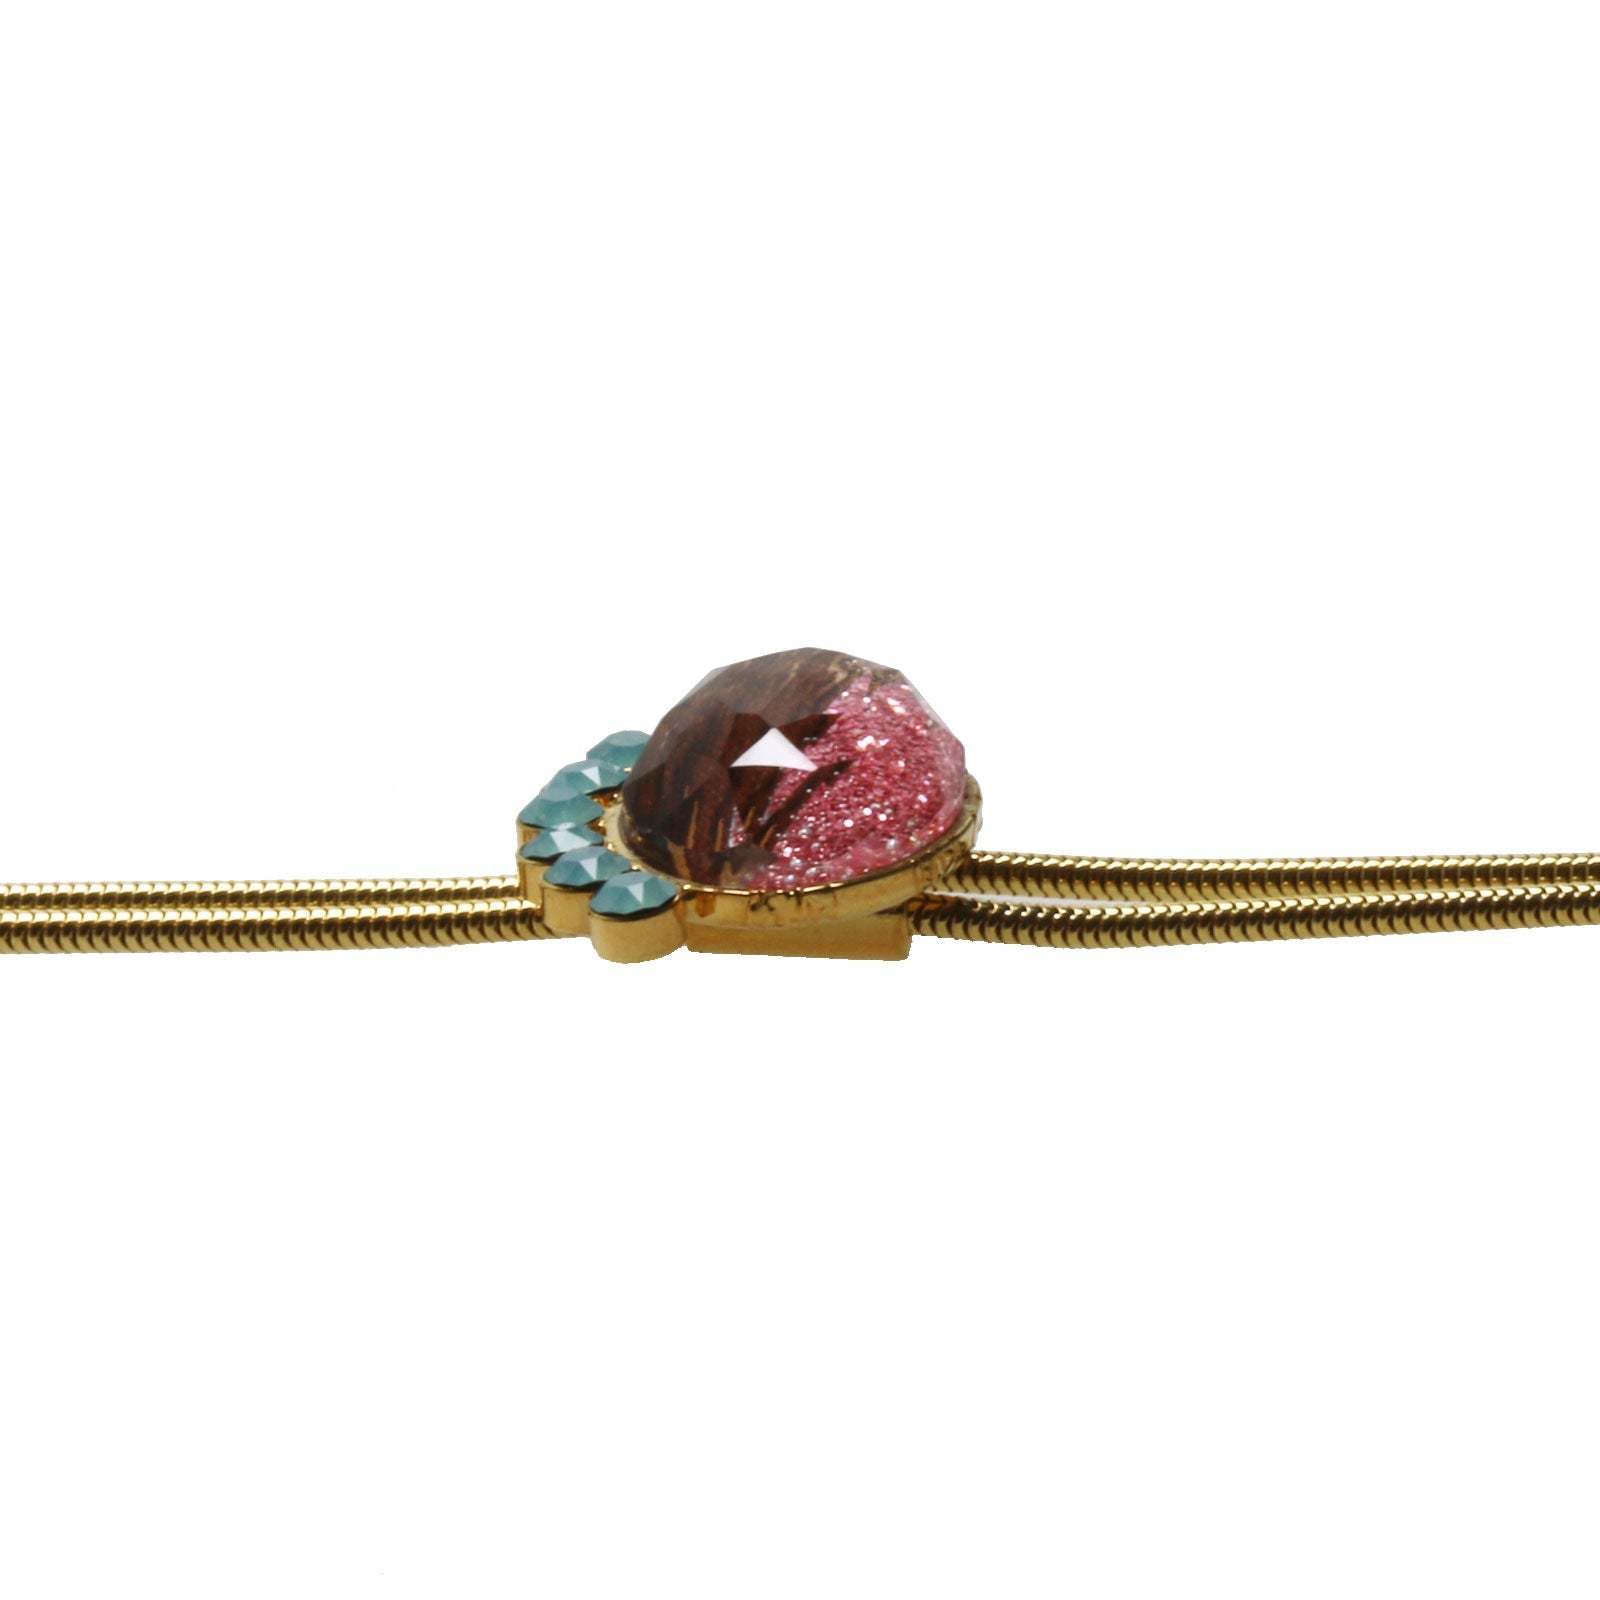 Chain Bolo Tie Wood Beads Turquoise Shell Pink TAMARUSAN